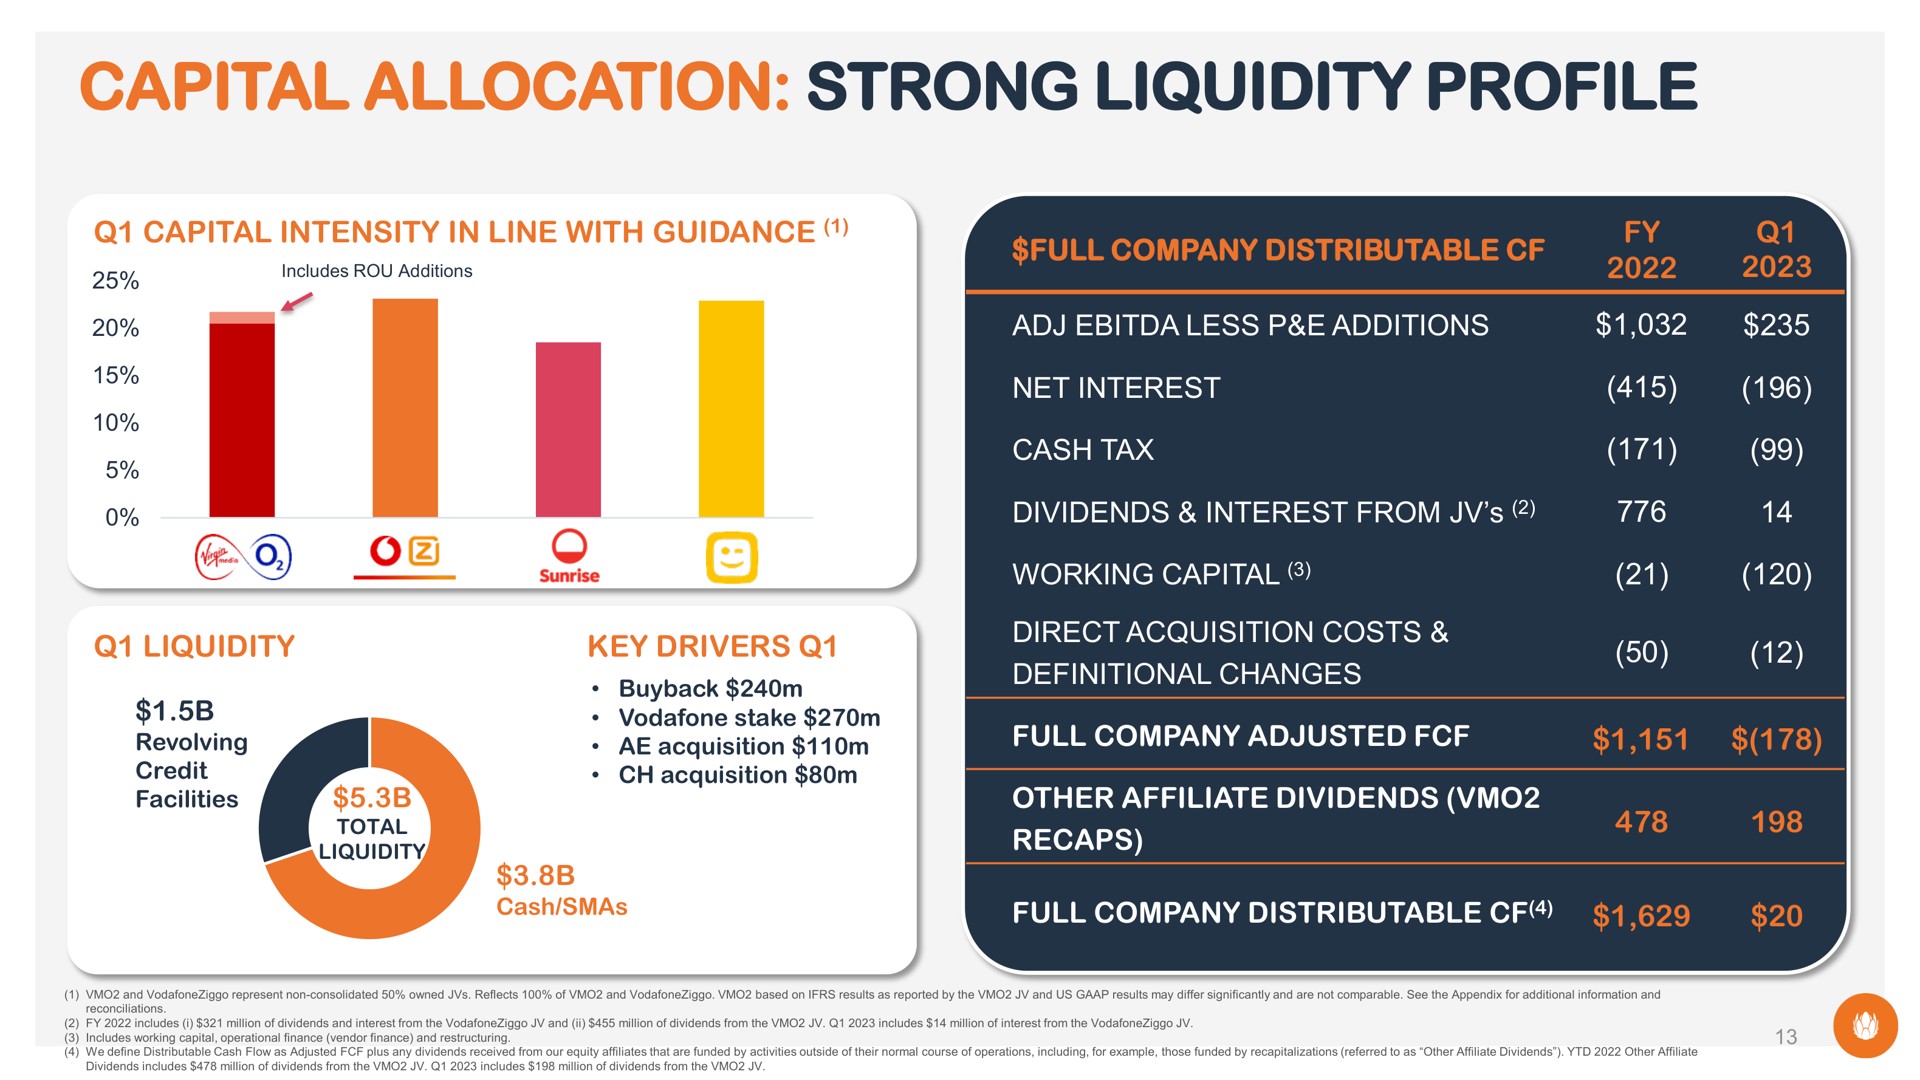 capital allocation strong liquidity profile other affiliate dividends recaps | Liberty Global